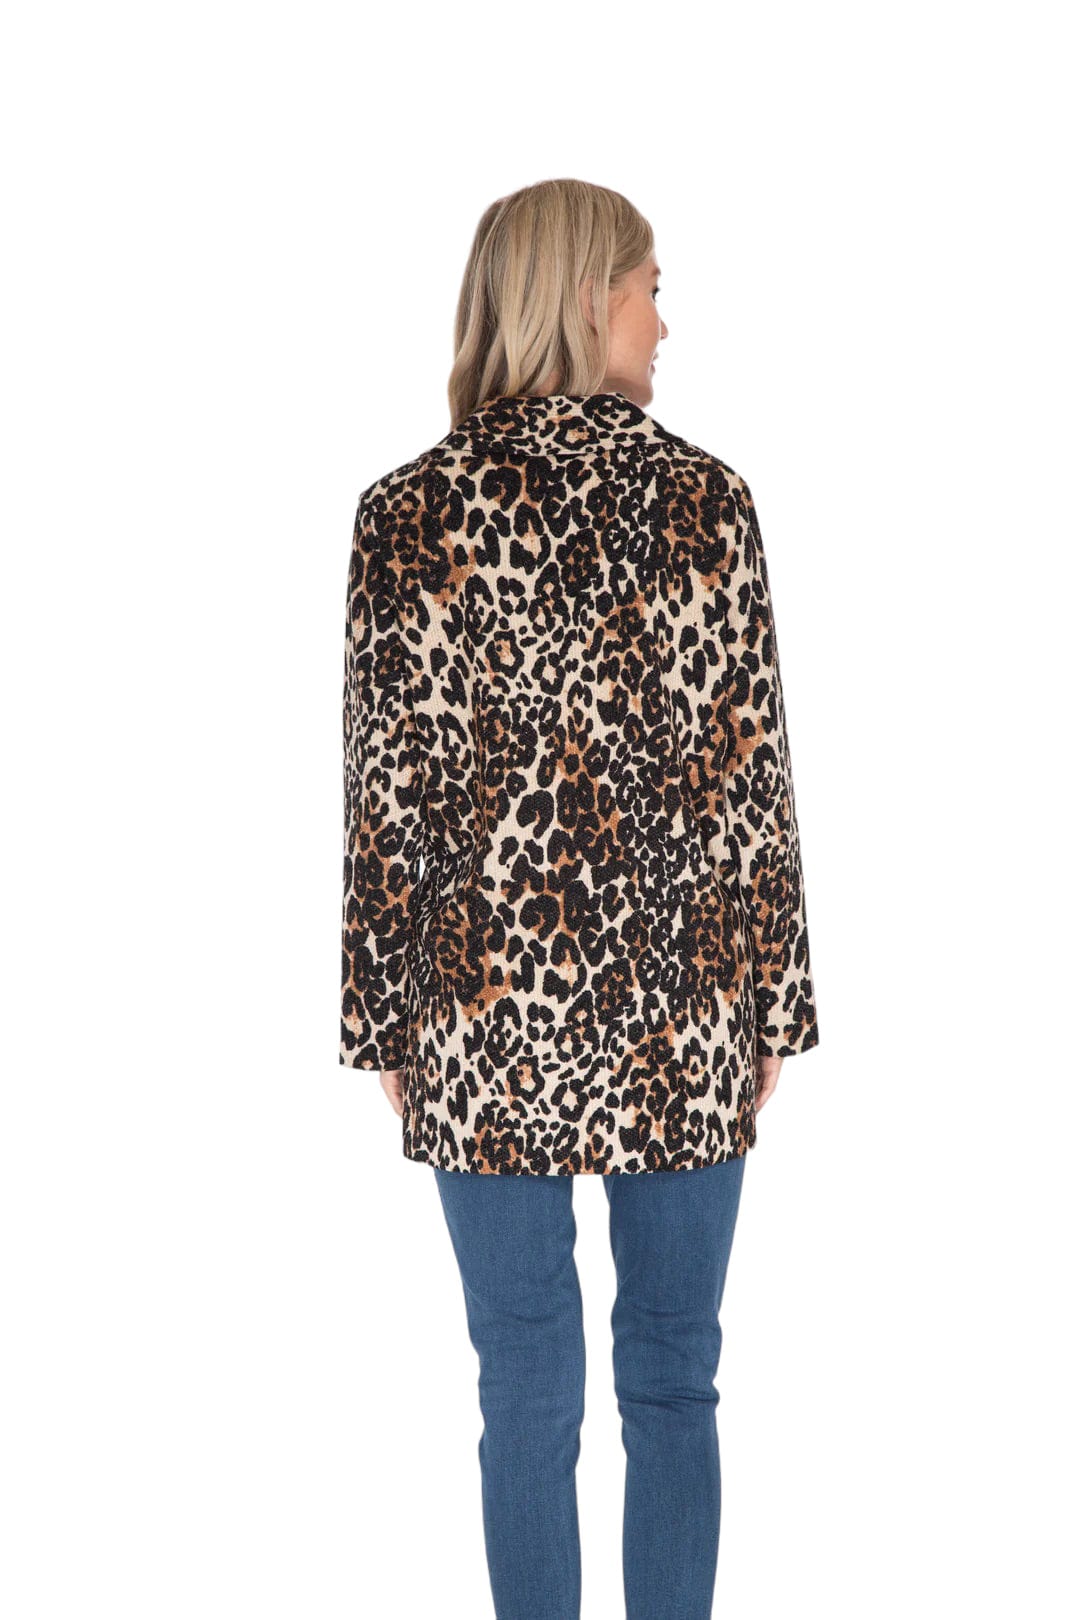 Jacket Multiples Three Button Animal Print Jacket Multiples Clothing Co.